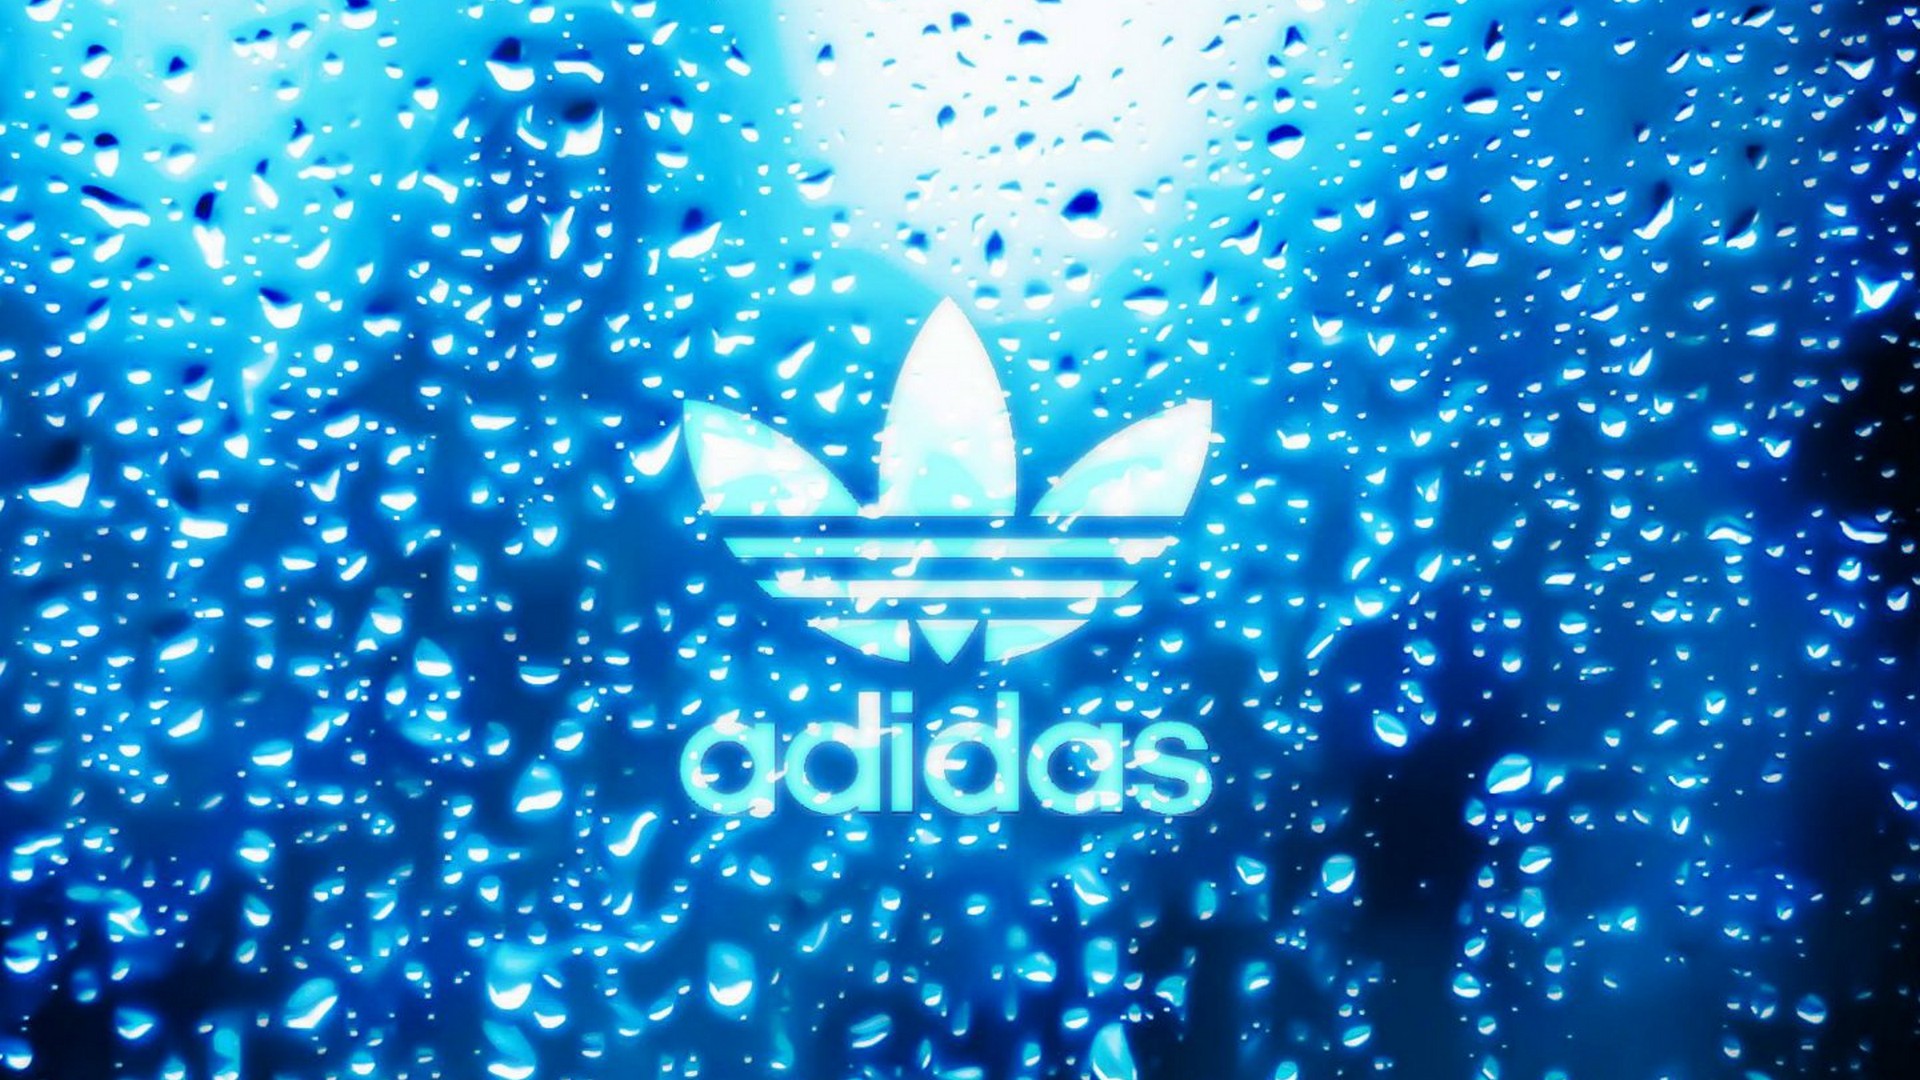 Adidas Desktop Backgrounds Hd With High-resolution - Adidas Background For Computer - HD Wallpaper 